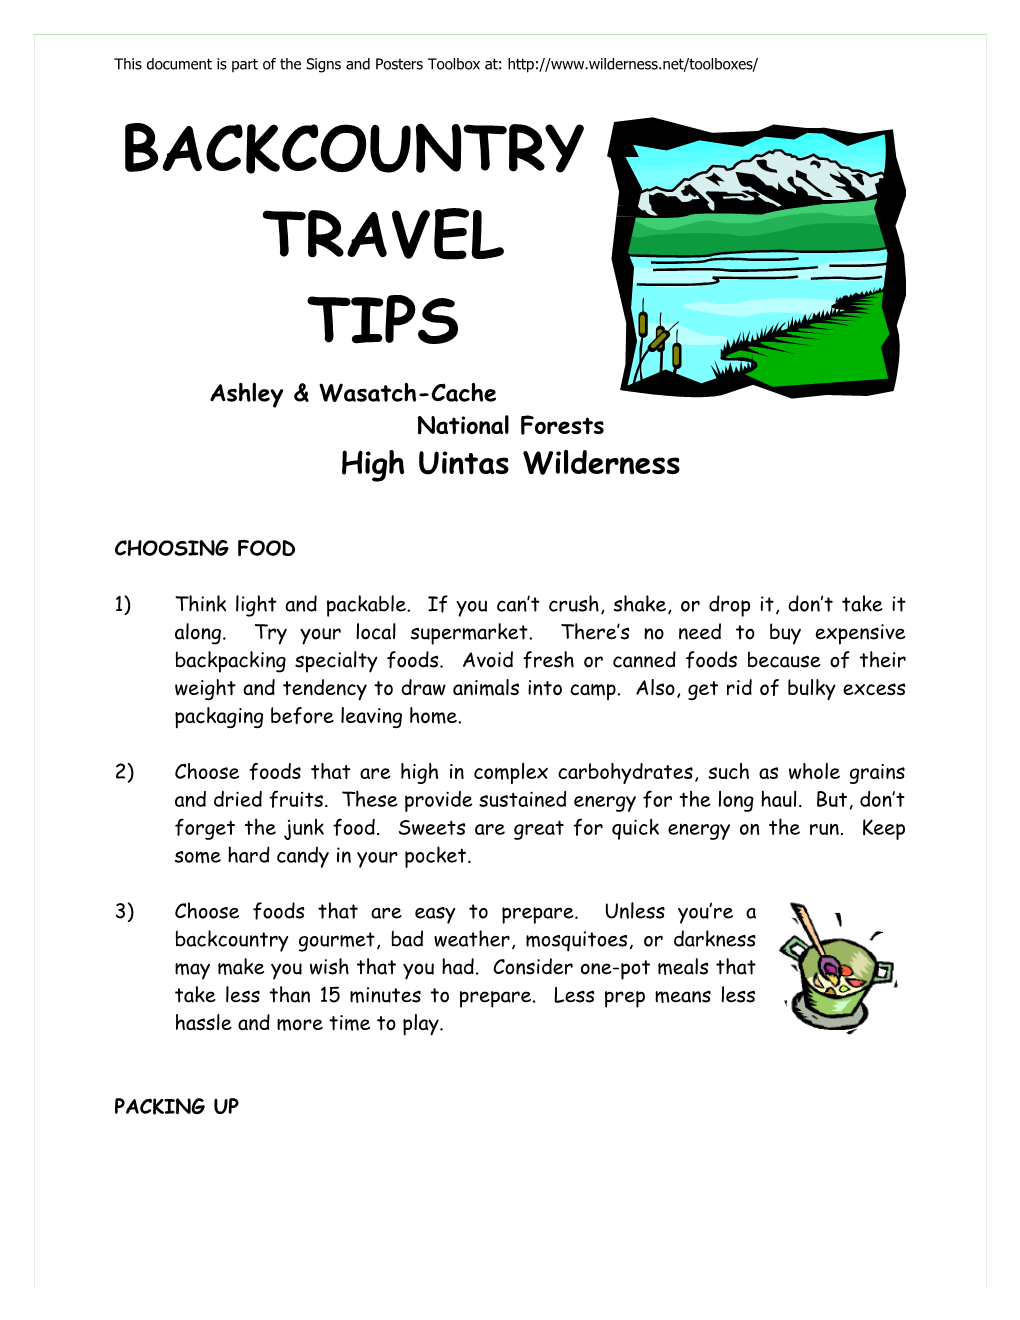 BACKCOUNTRY TRAVEL TIPS: High Uintas Wilderness